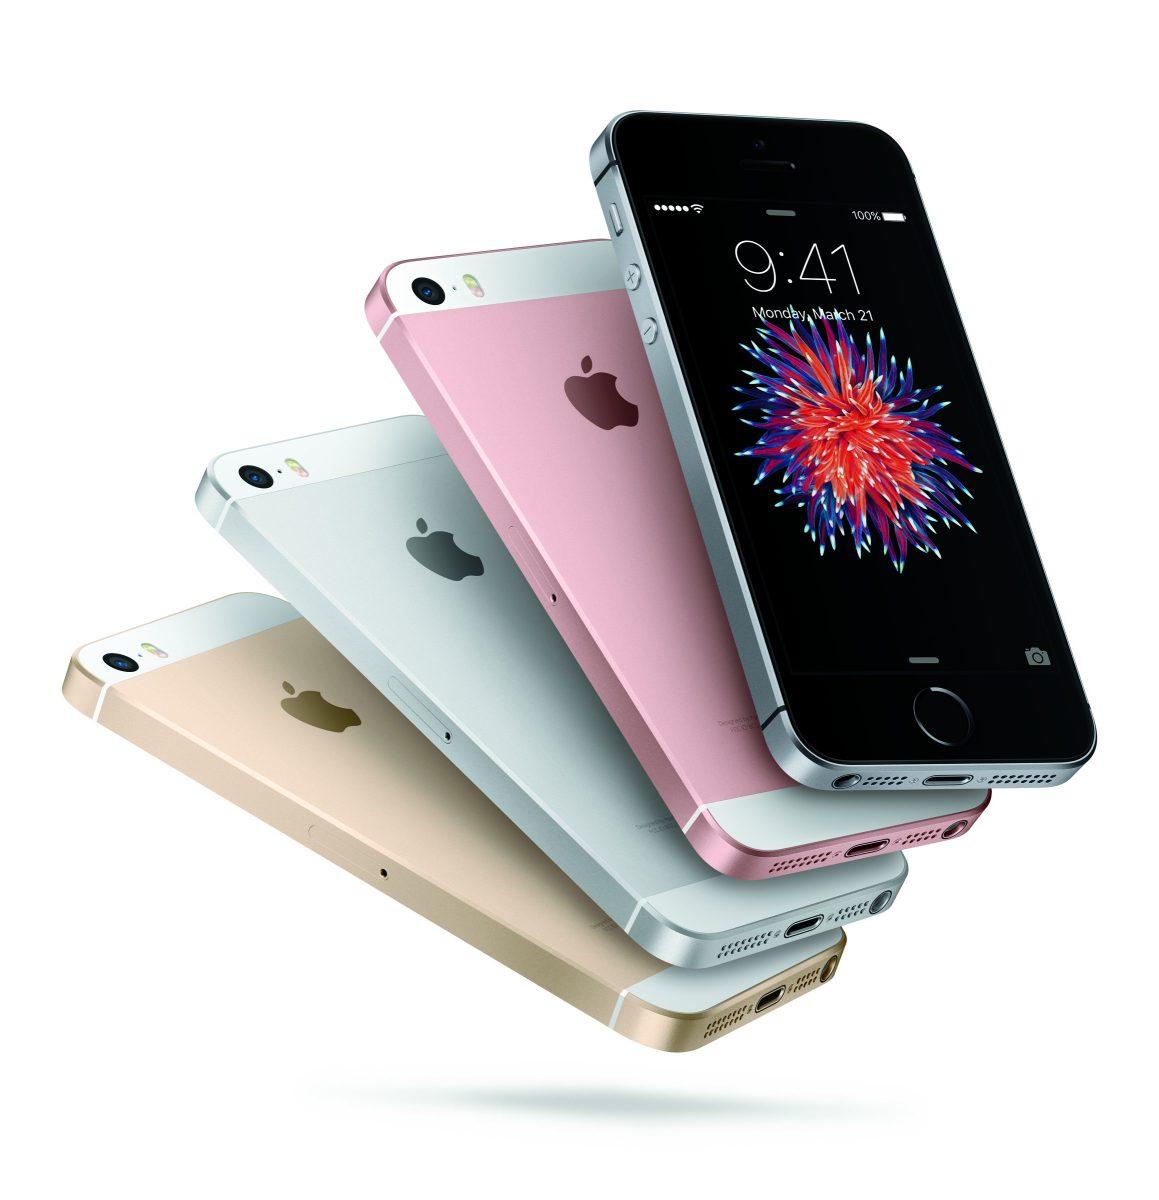 Apple announced Monday that they will be releasing the smaller iPhone SE March 31.